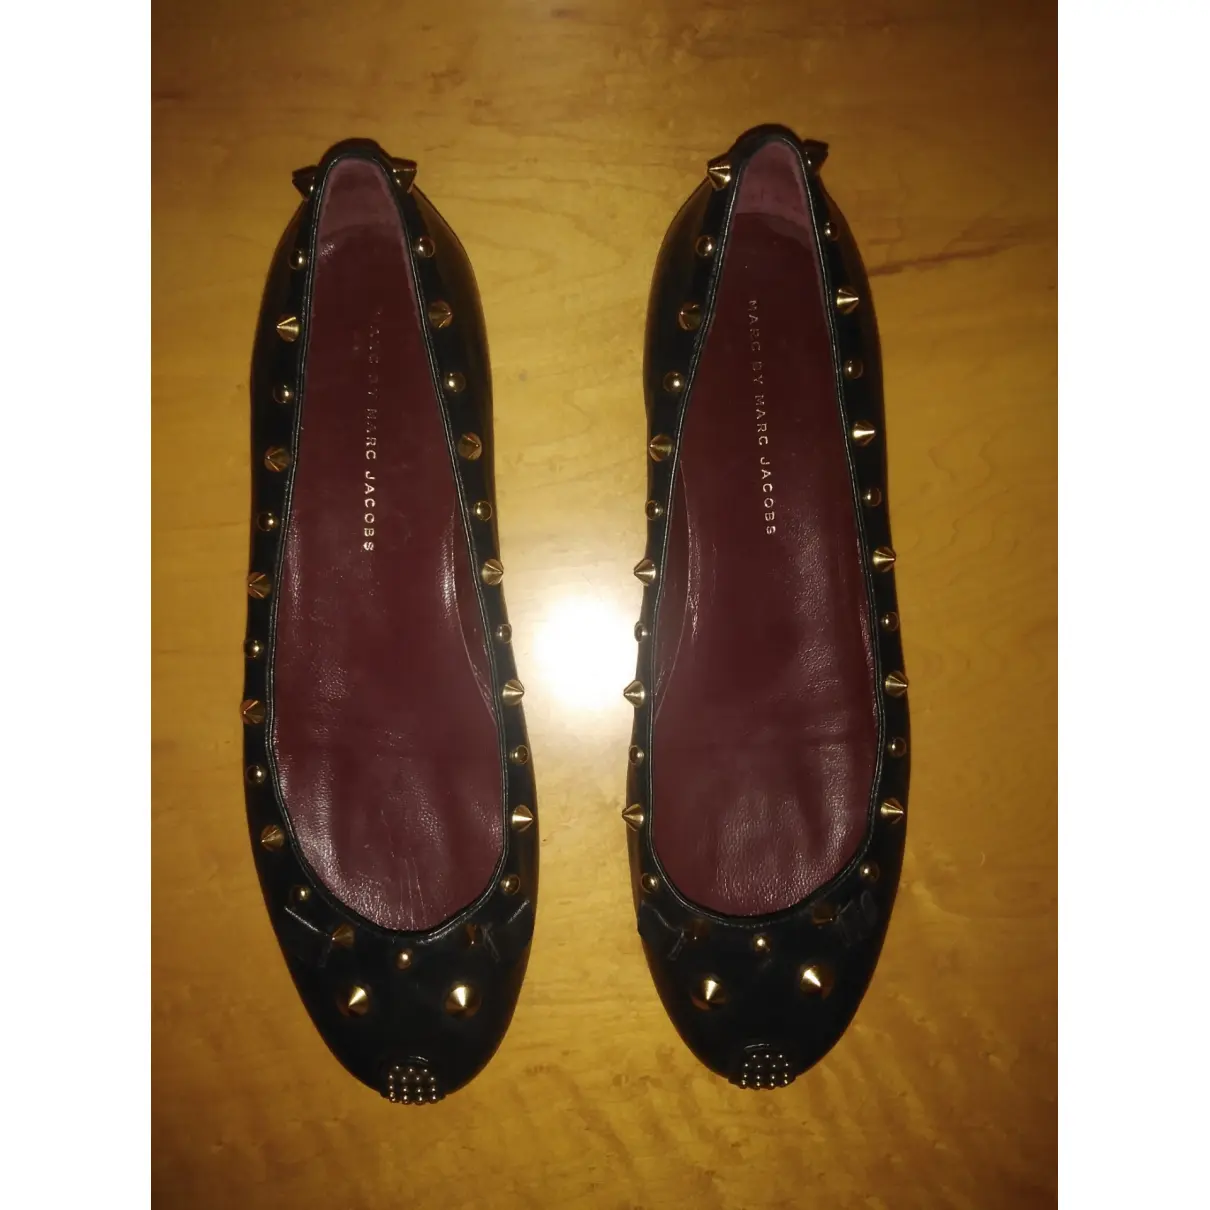 Buy Marc by Marc Jacobs Leather ballet flats online